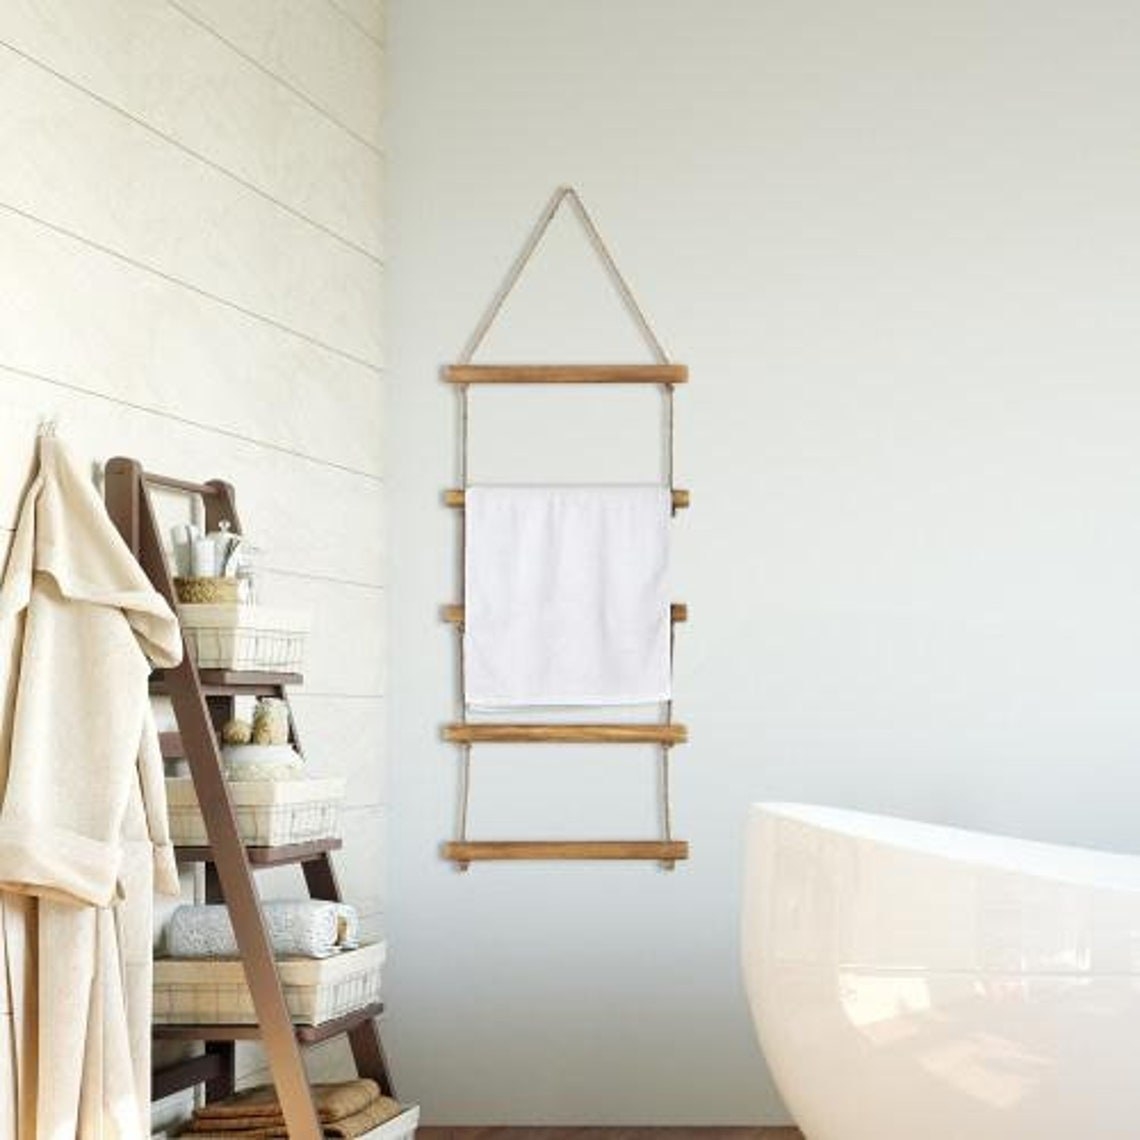 a hanging ladder made of wood and rope holding a towel in a bathroom